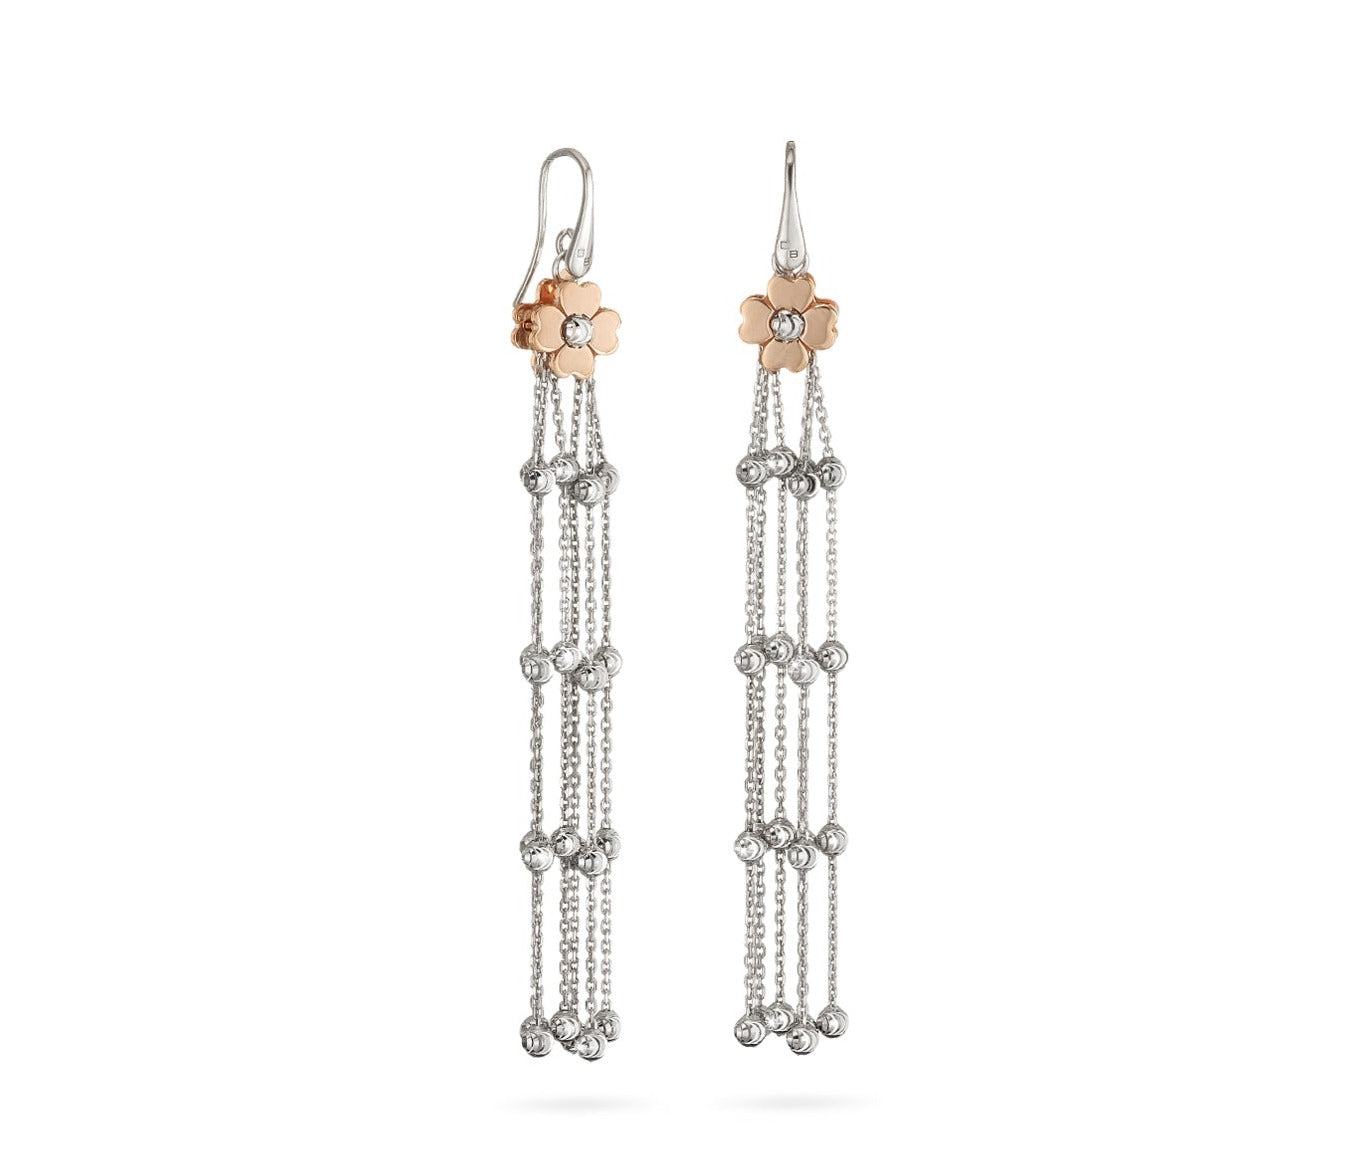 Sterling silver drop earrings coated with rhodium   Friction backs  Two rose gold flowers on each earring  Six strands dangling from each earring with four beads (diamond cut) on each strand.  3" longea  Desmos Collection